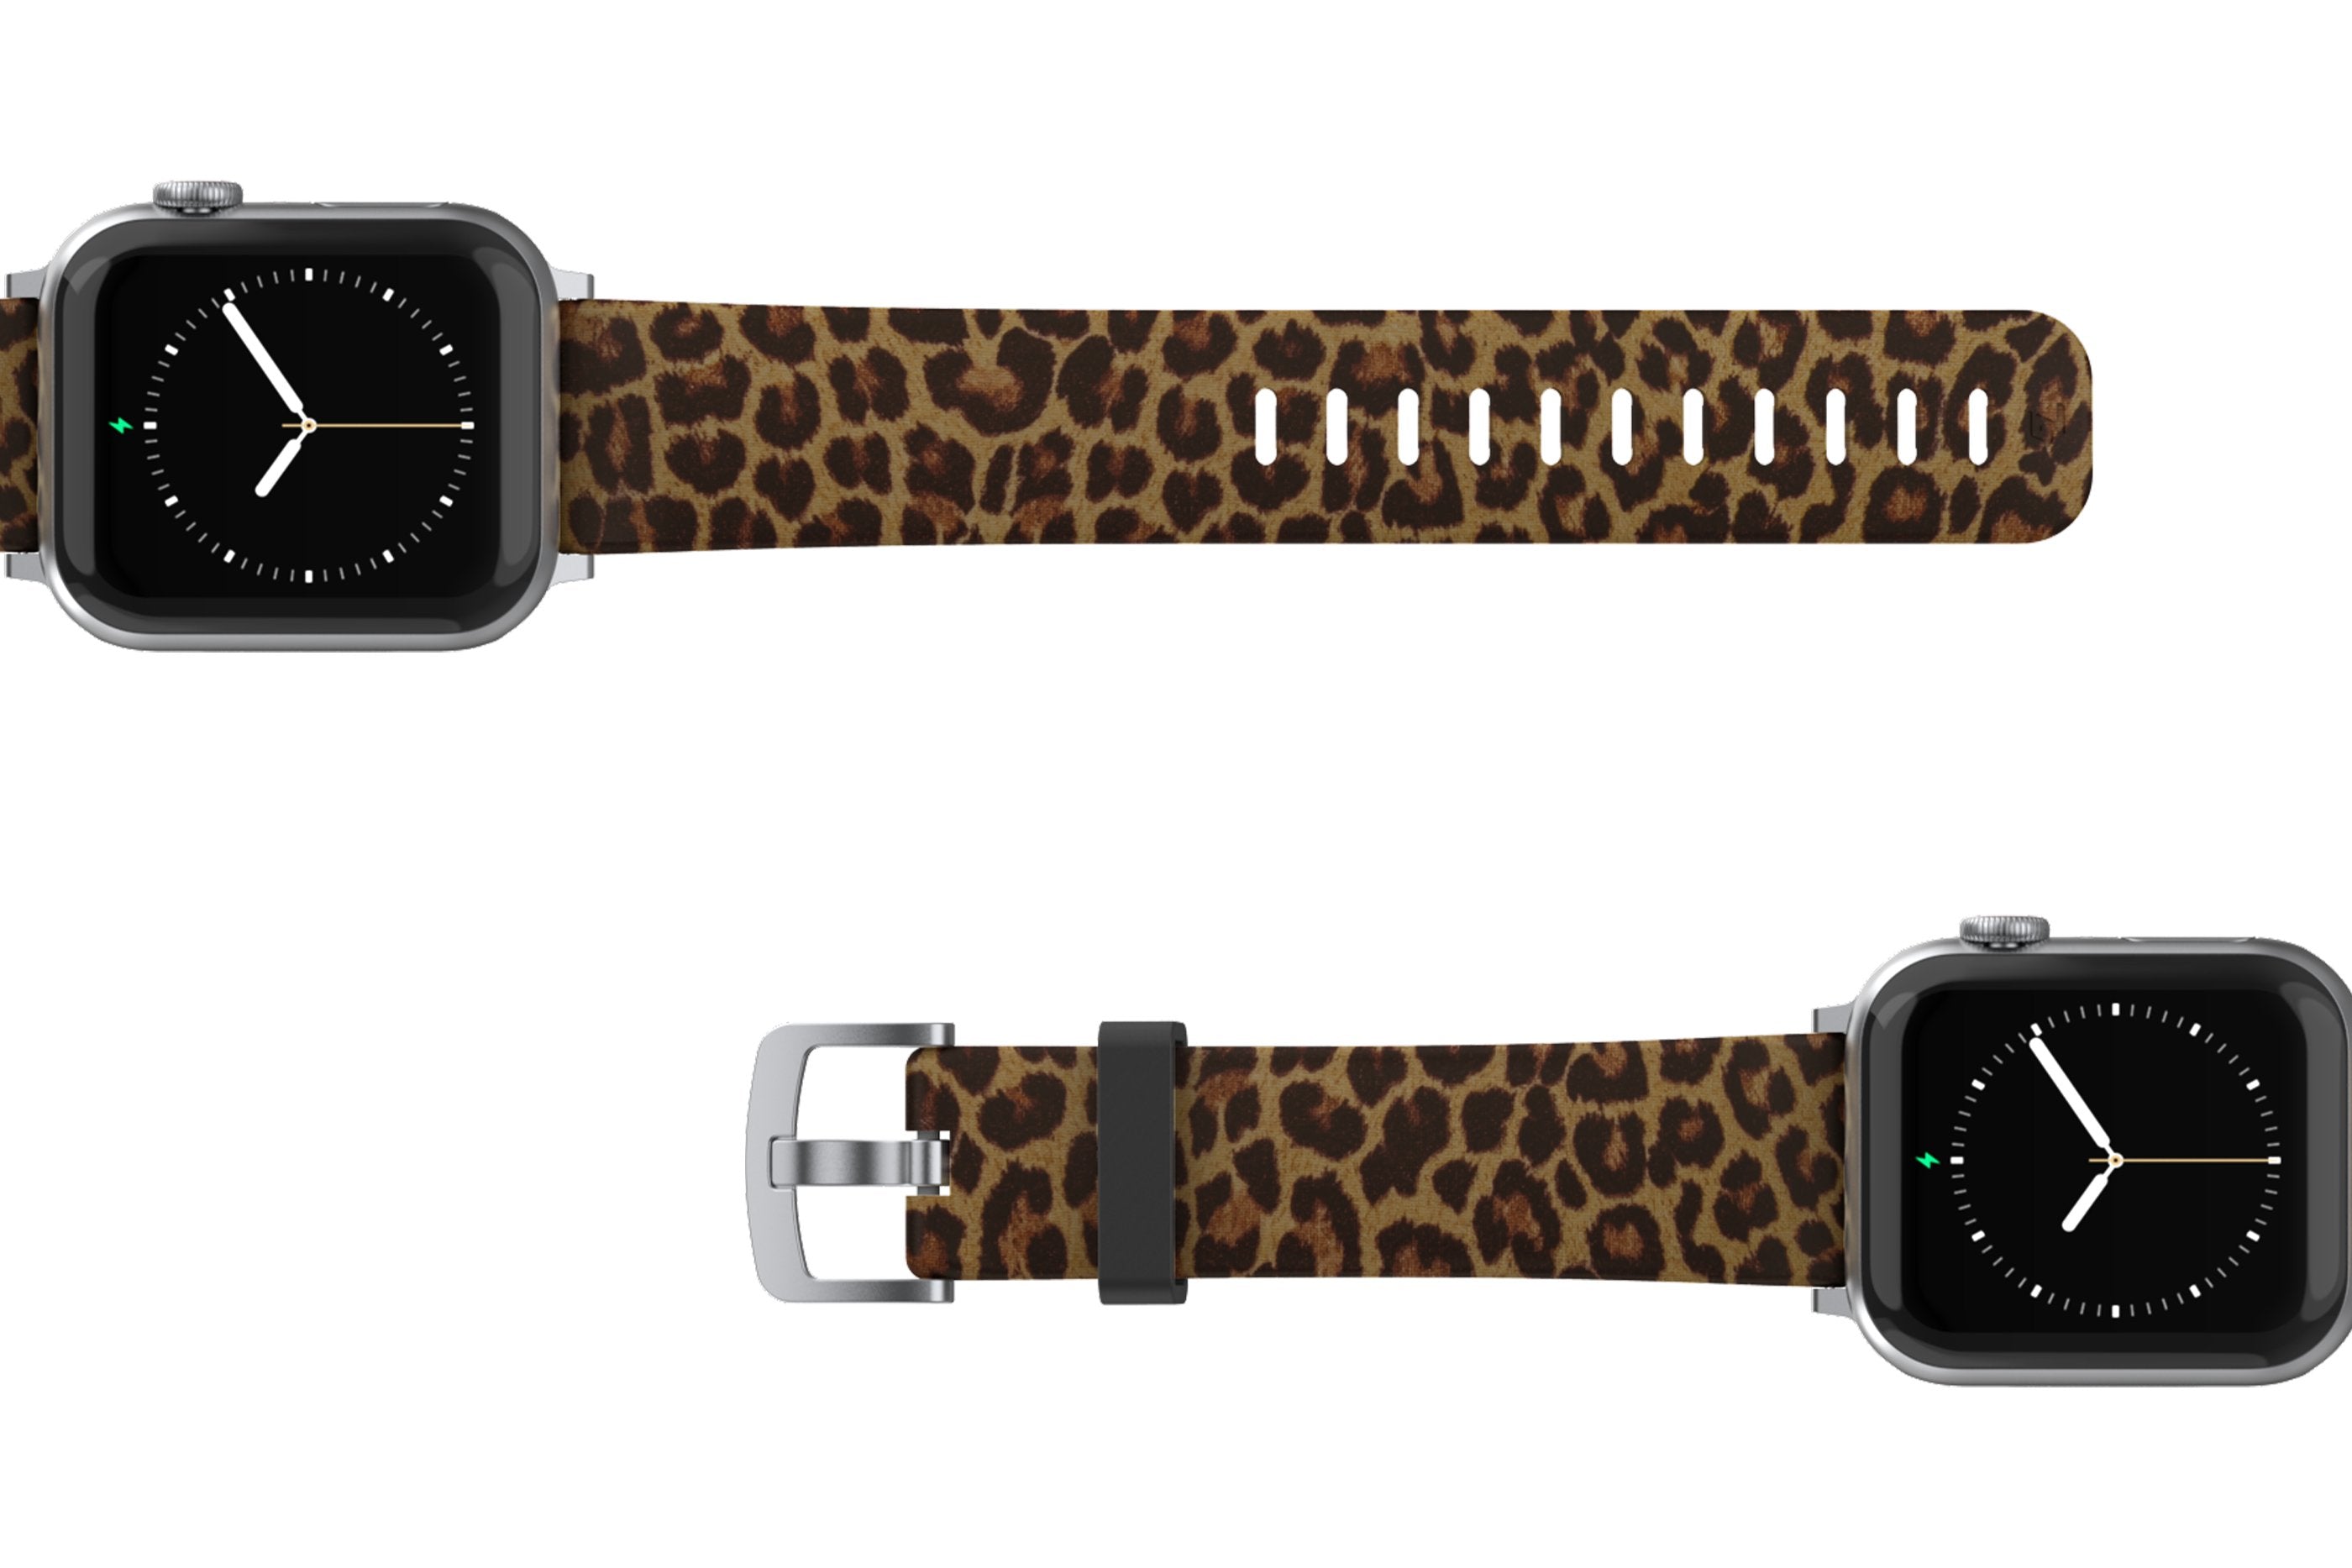 Leopard Apple Watch Band with silver hardware viewed top down